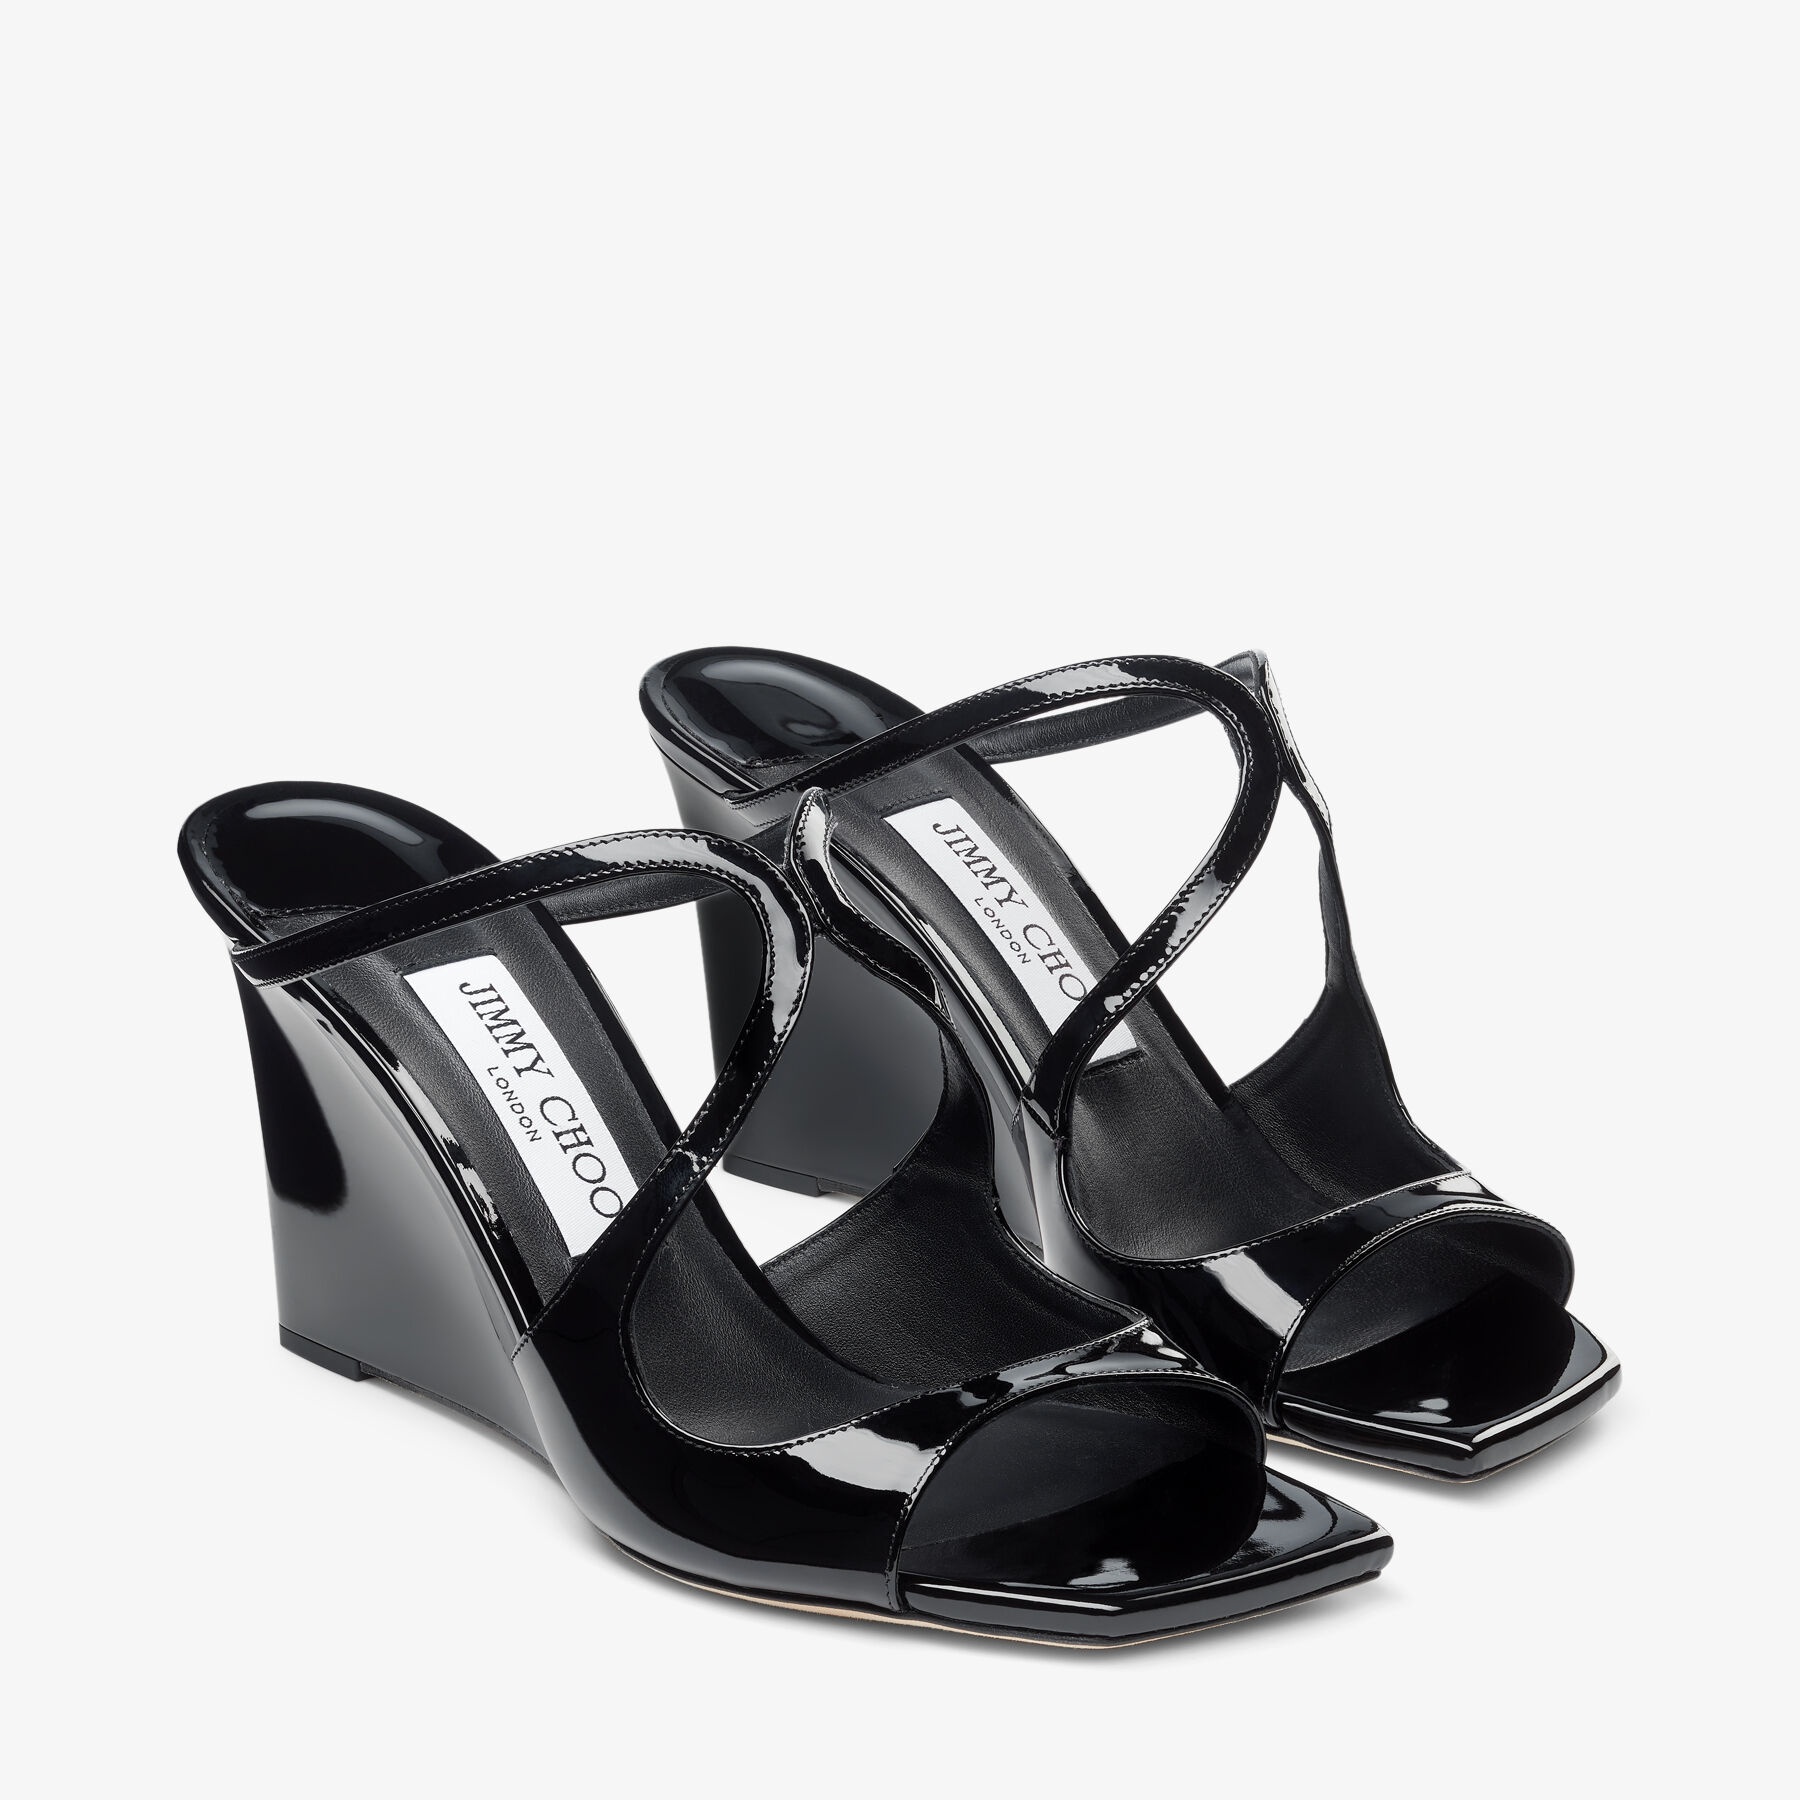 Anise Wedge 85
Black Patent Leather Wedge Mules - 2